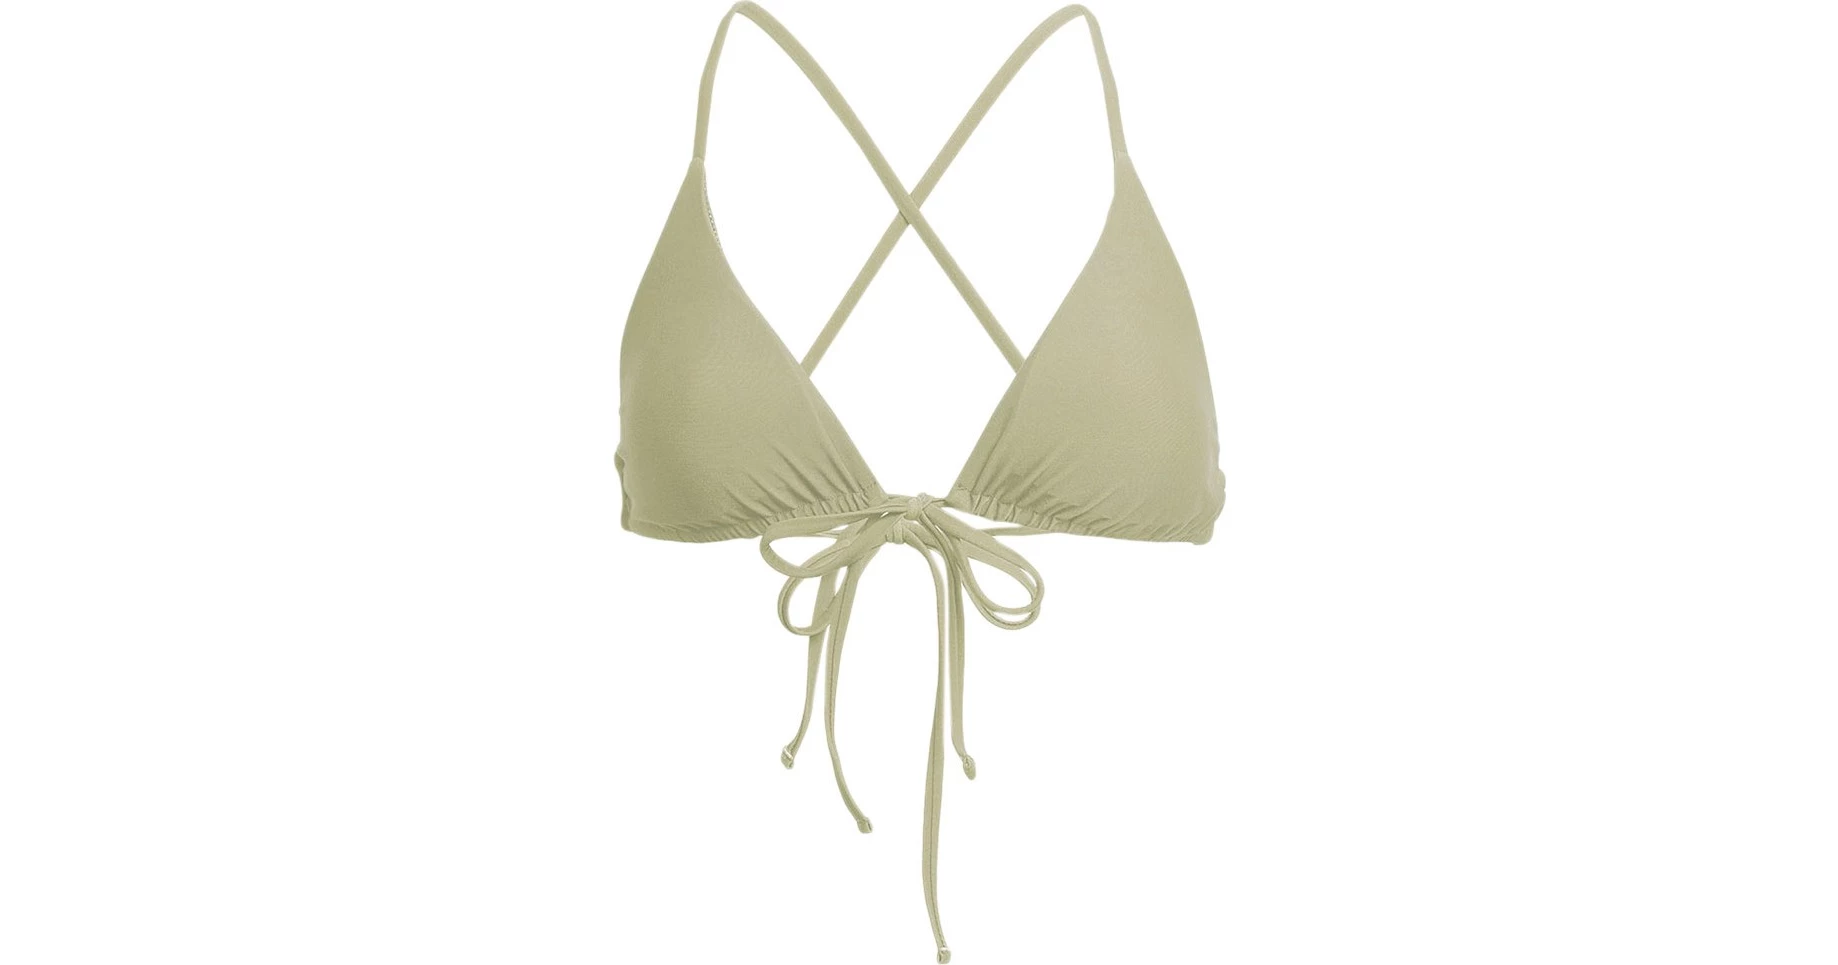 Swimsuit top - OUTHORN